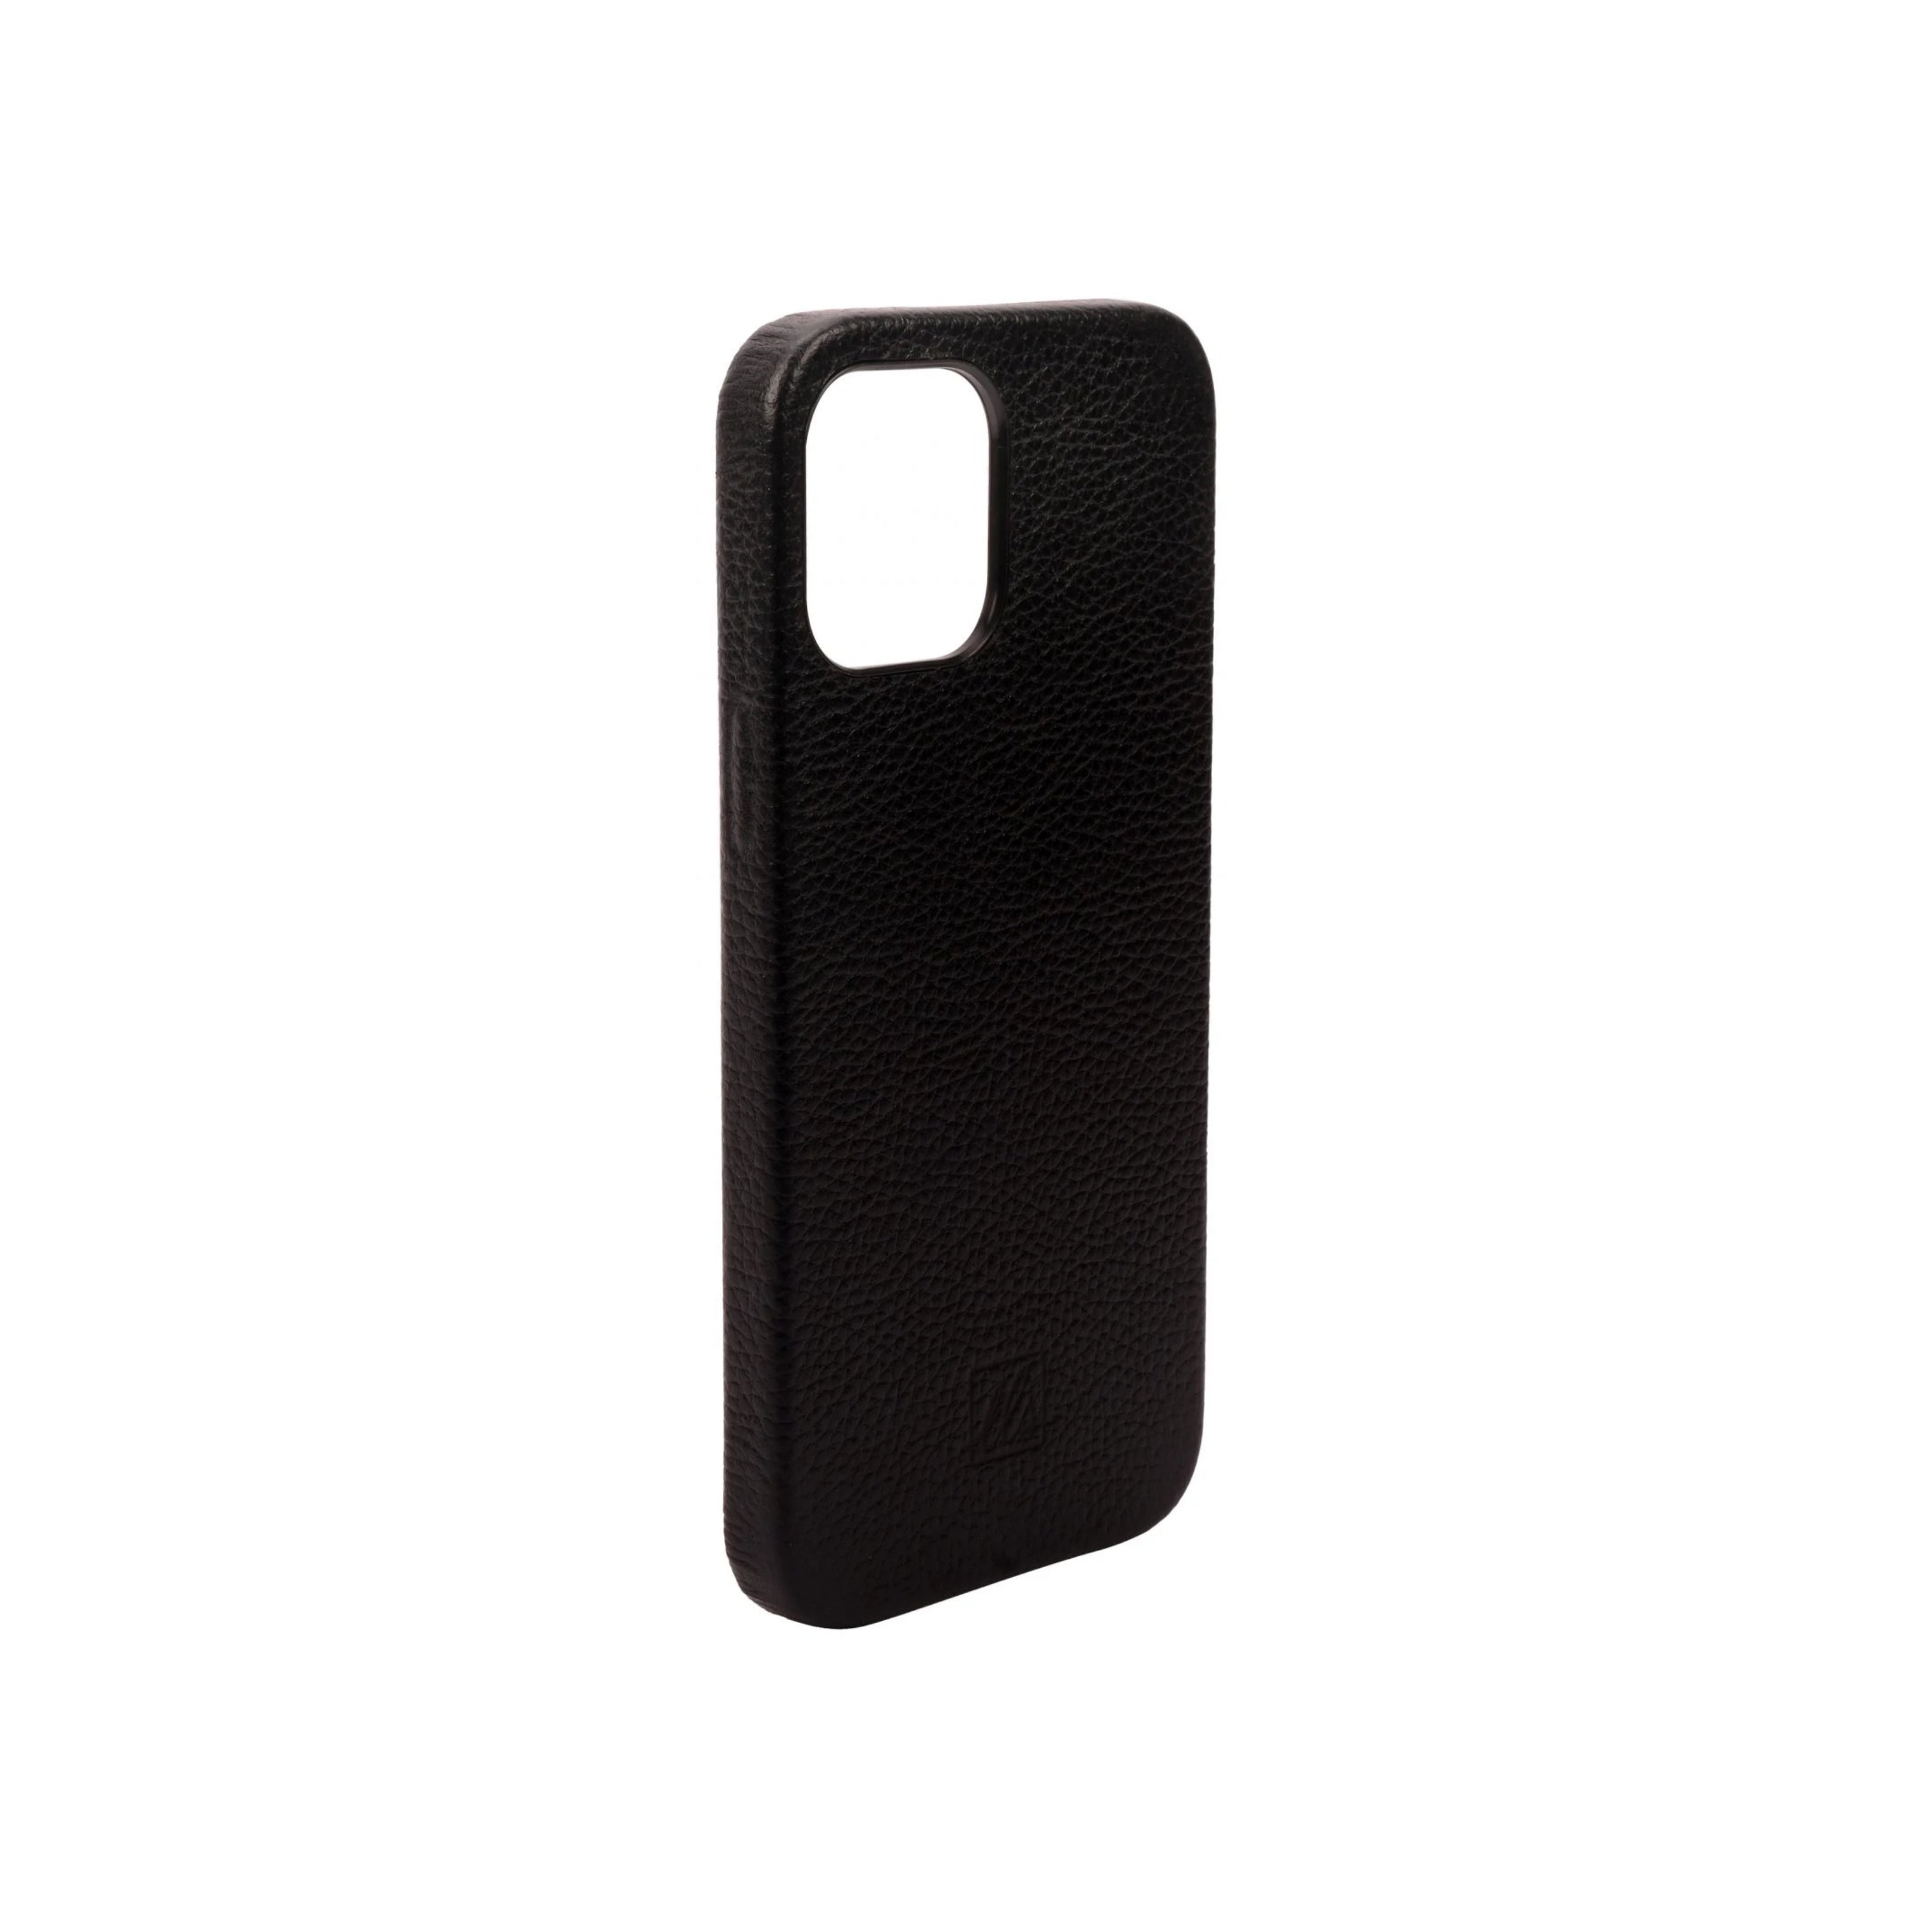 iPhone 12 Pro Max Leather cover